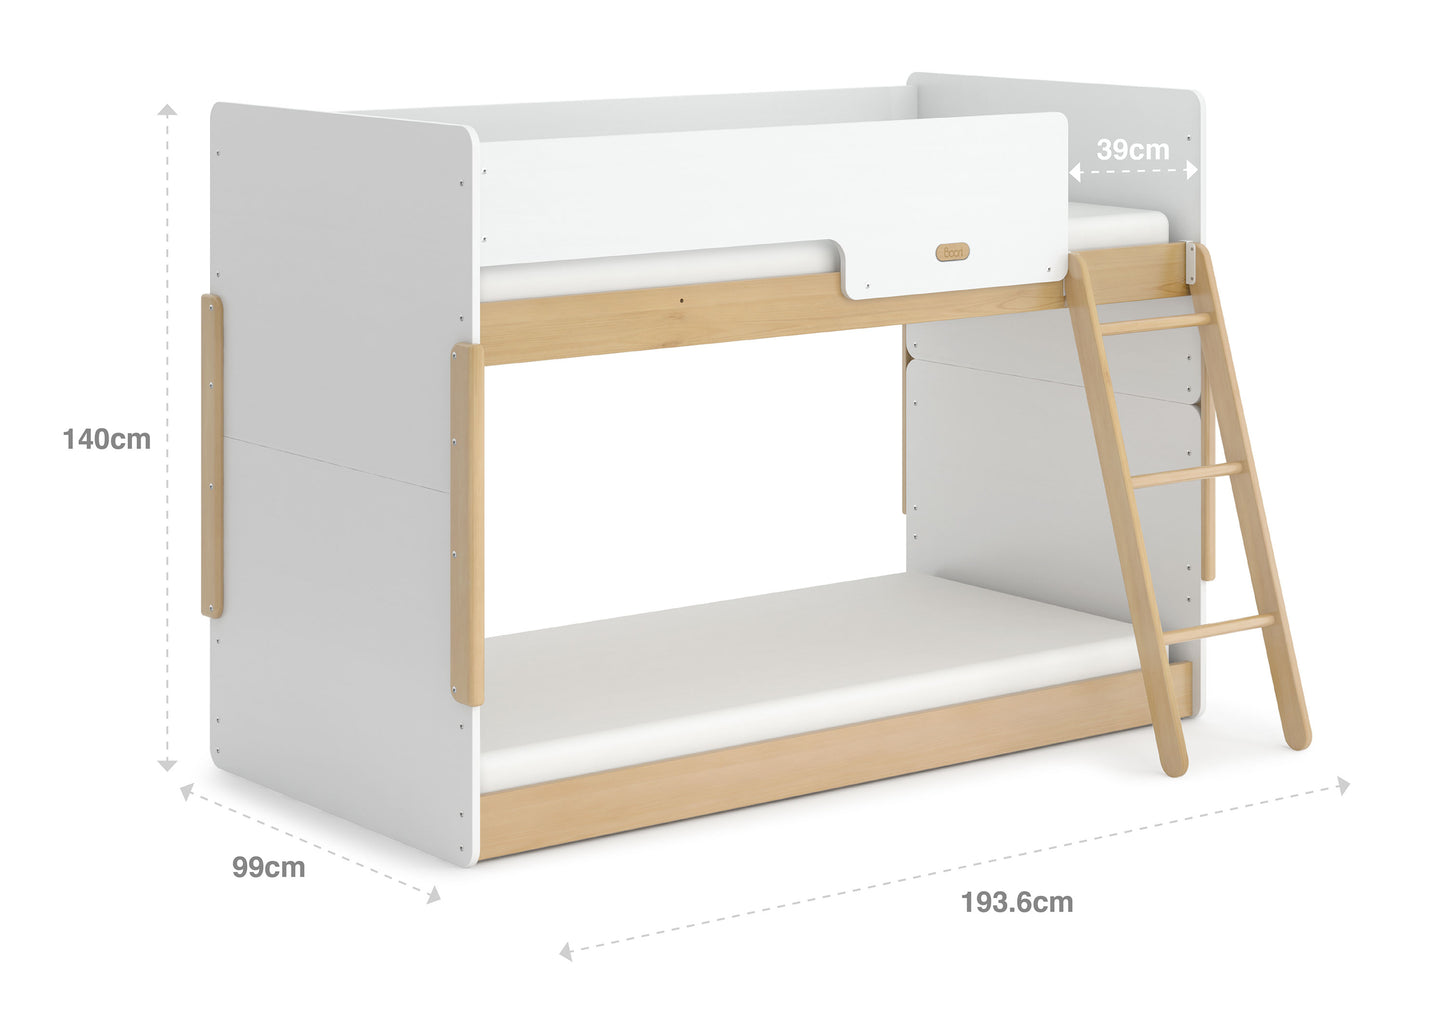 Barley White & Almond, Kids Beds, Kids beds frames, kids single bed, space saving kids beds, double-decker bed, bunk bed Malaysia